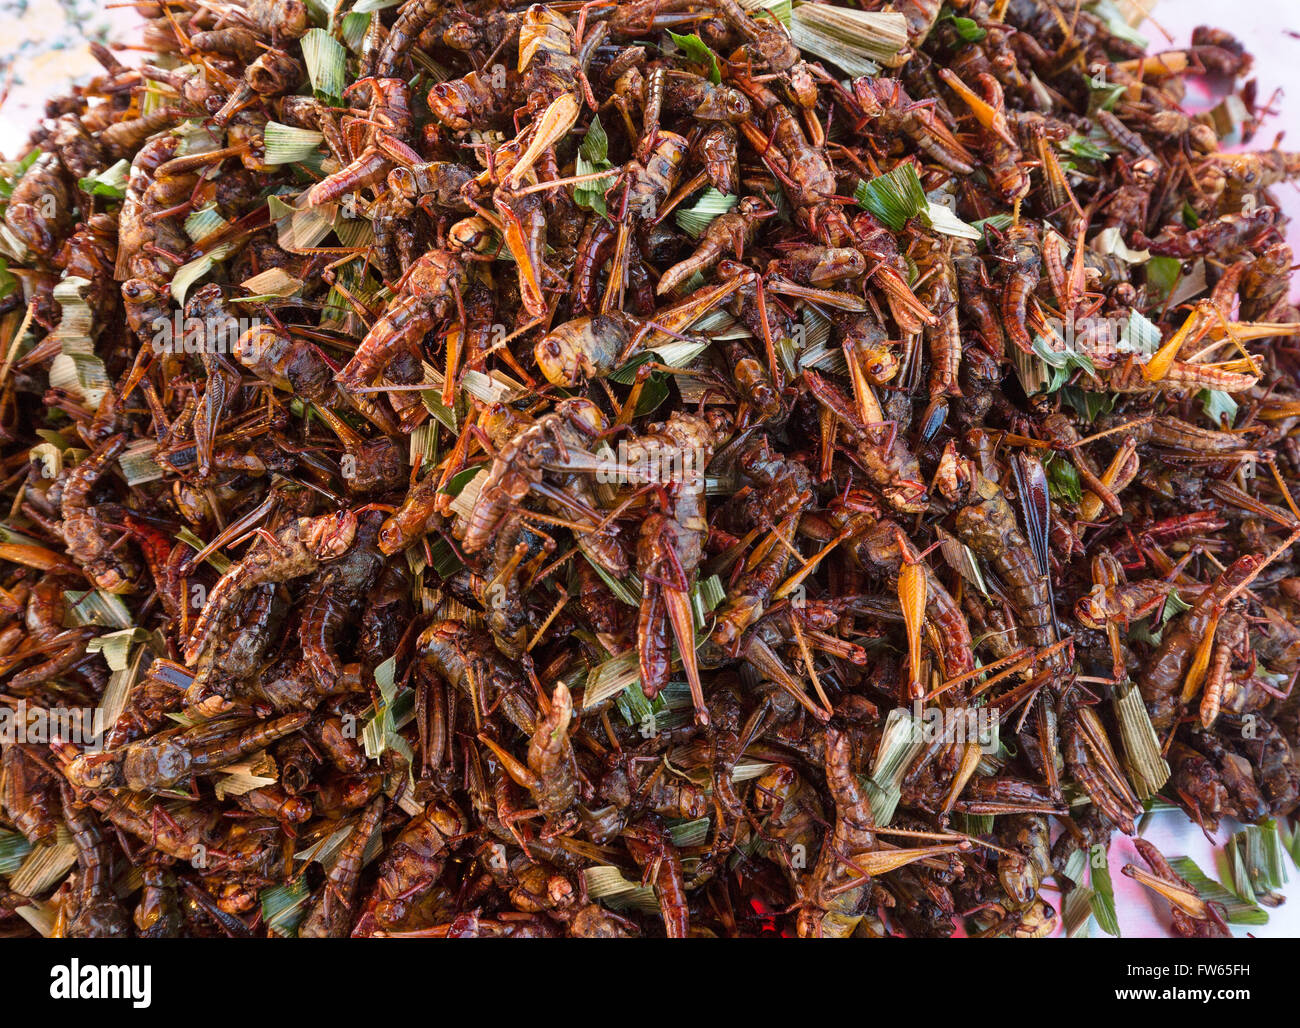 Fried grasshoppers on a market, food, Thai cuisine, specialty, Thailand Stock Photo